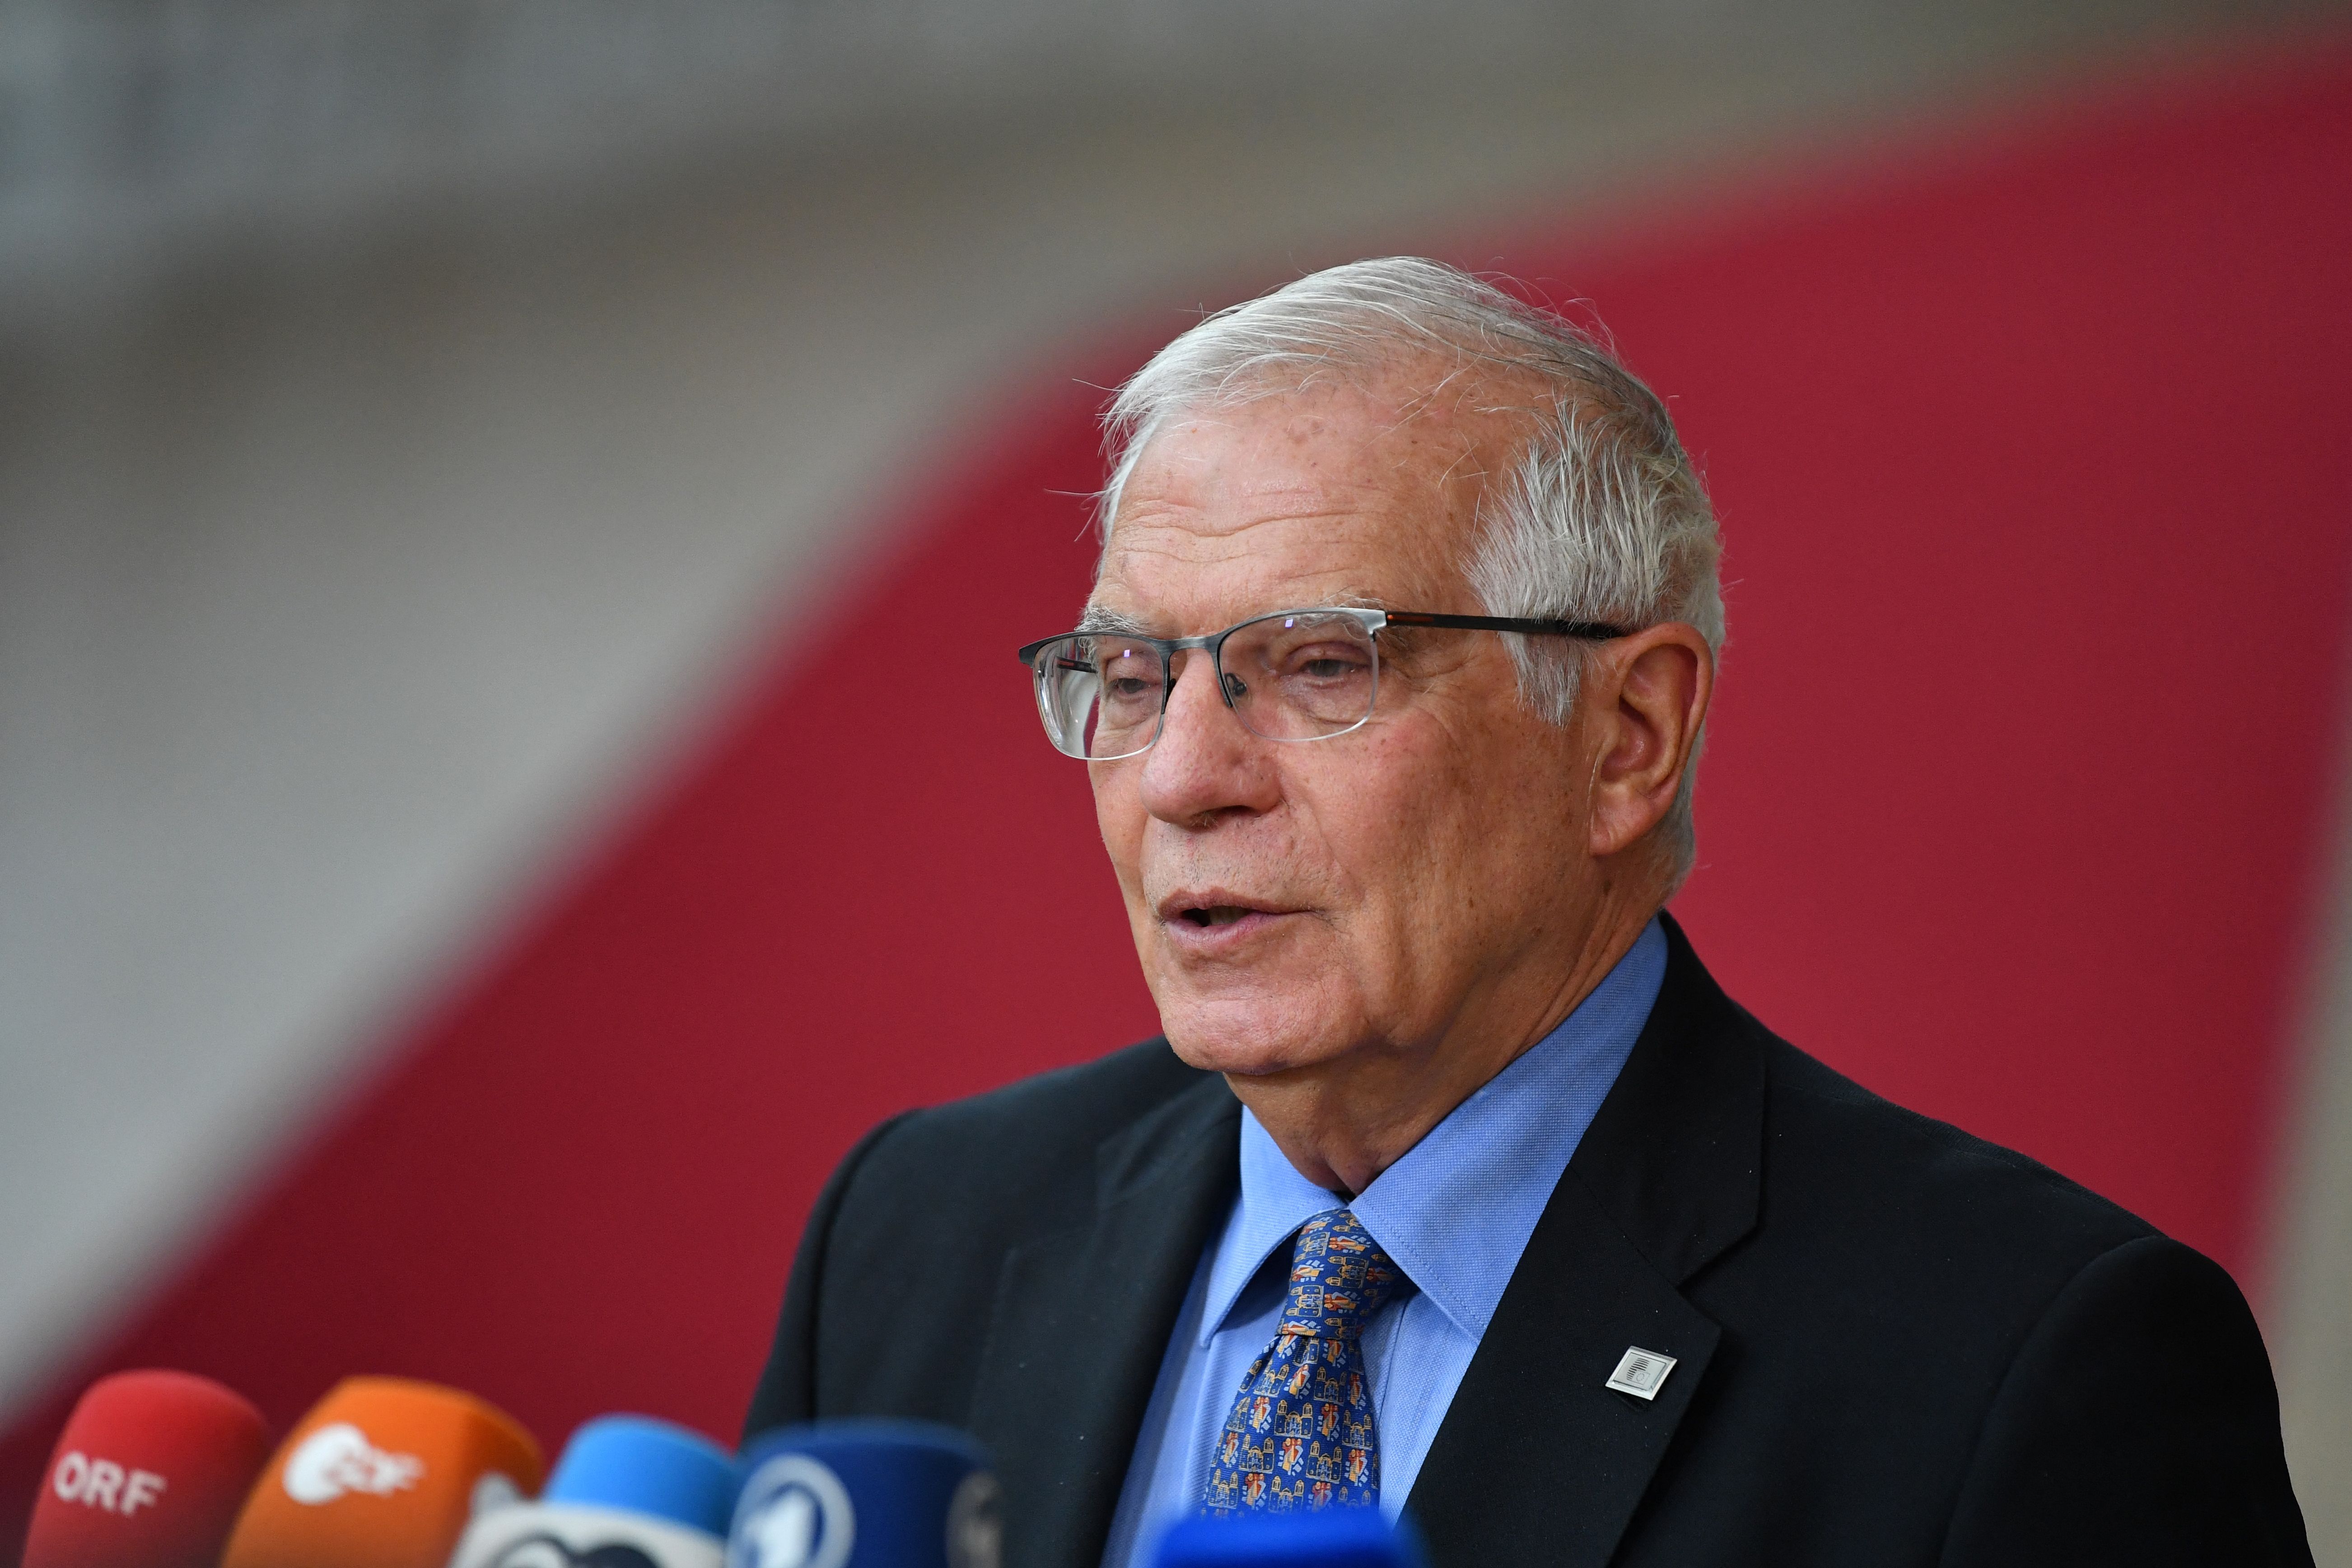 Josep Borrell, the European Union's High Representative, talks to the press before a meeting at the European Council, in Brussels, on May 30.